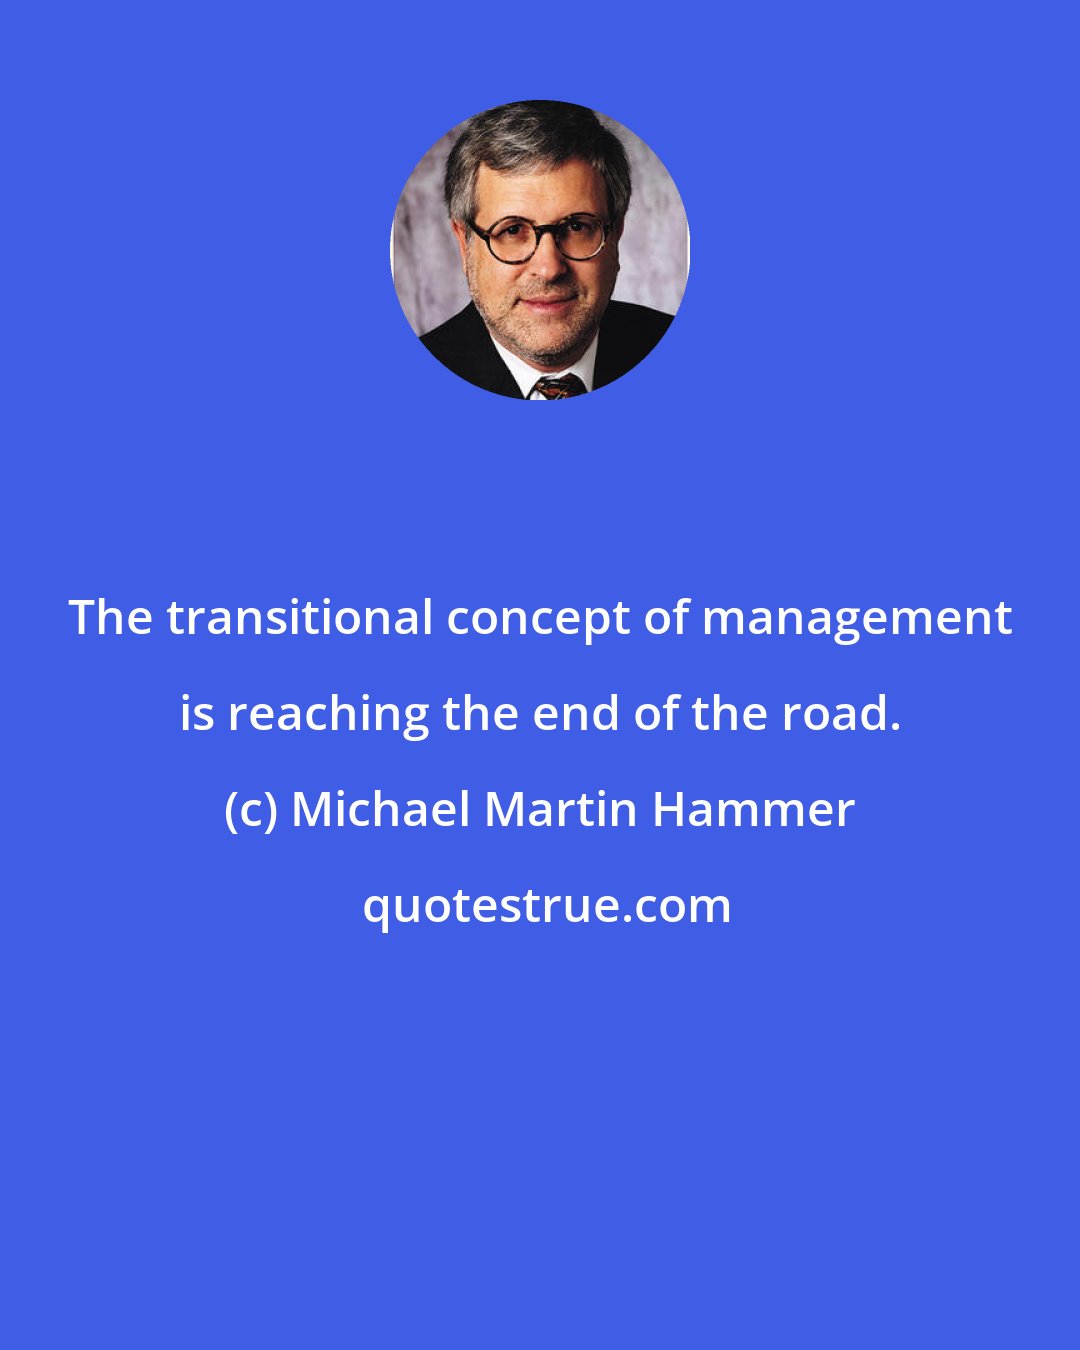 Michael Martin Hammer: The transitional concept of management is reaching the end of the road.